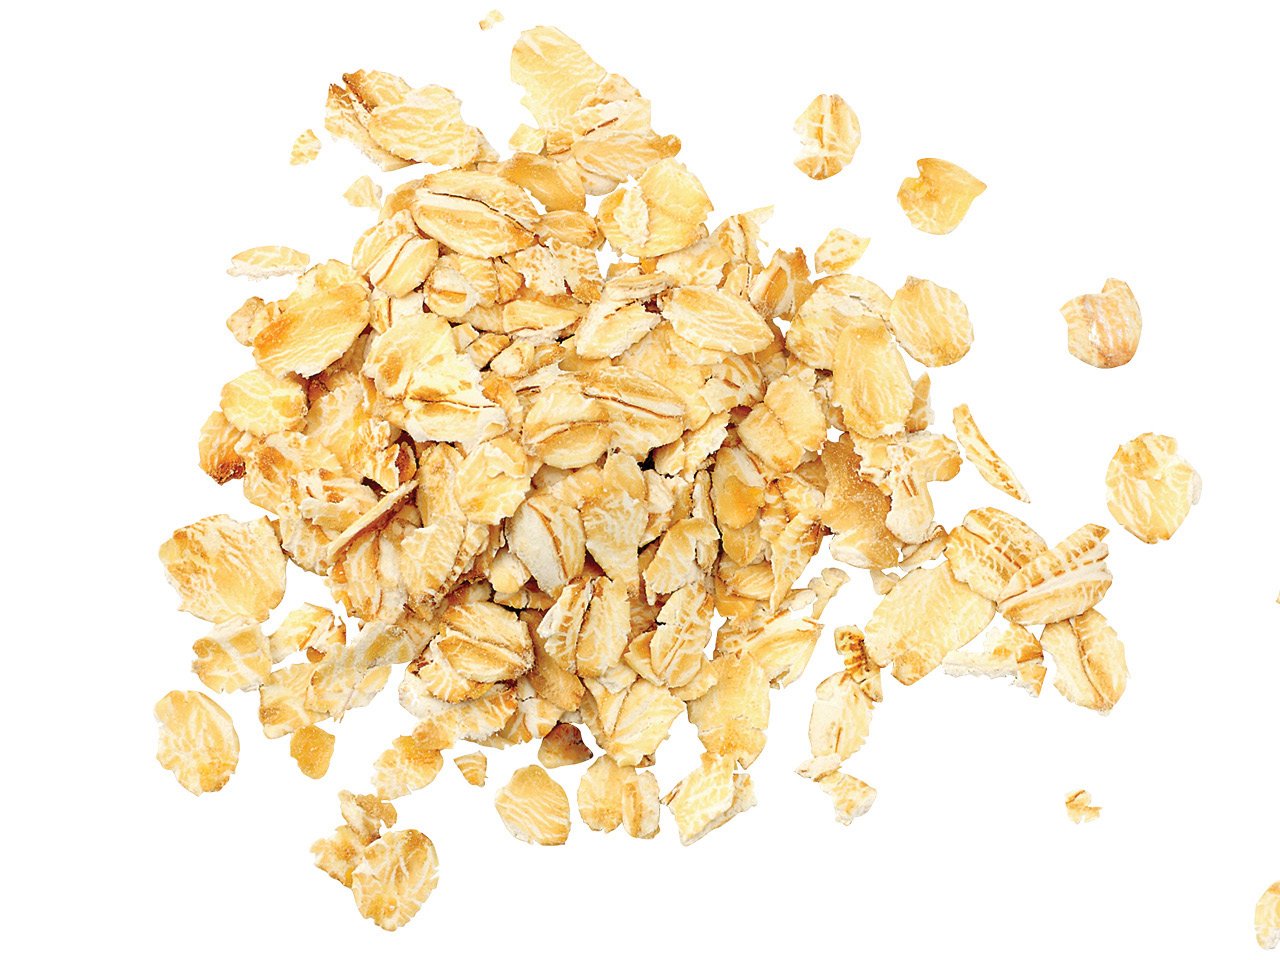 A small pile of rolled oats against a white background